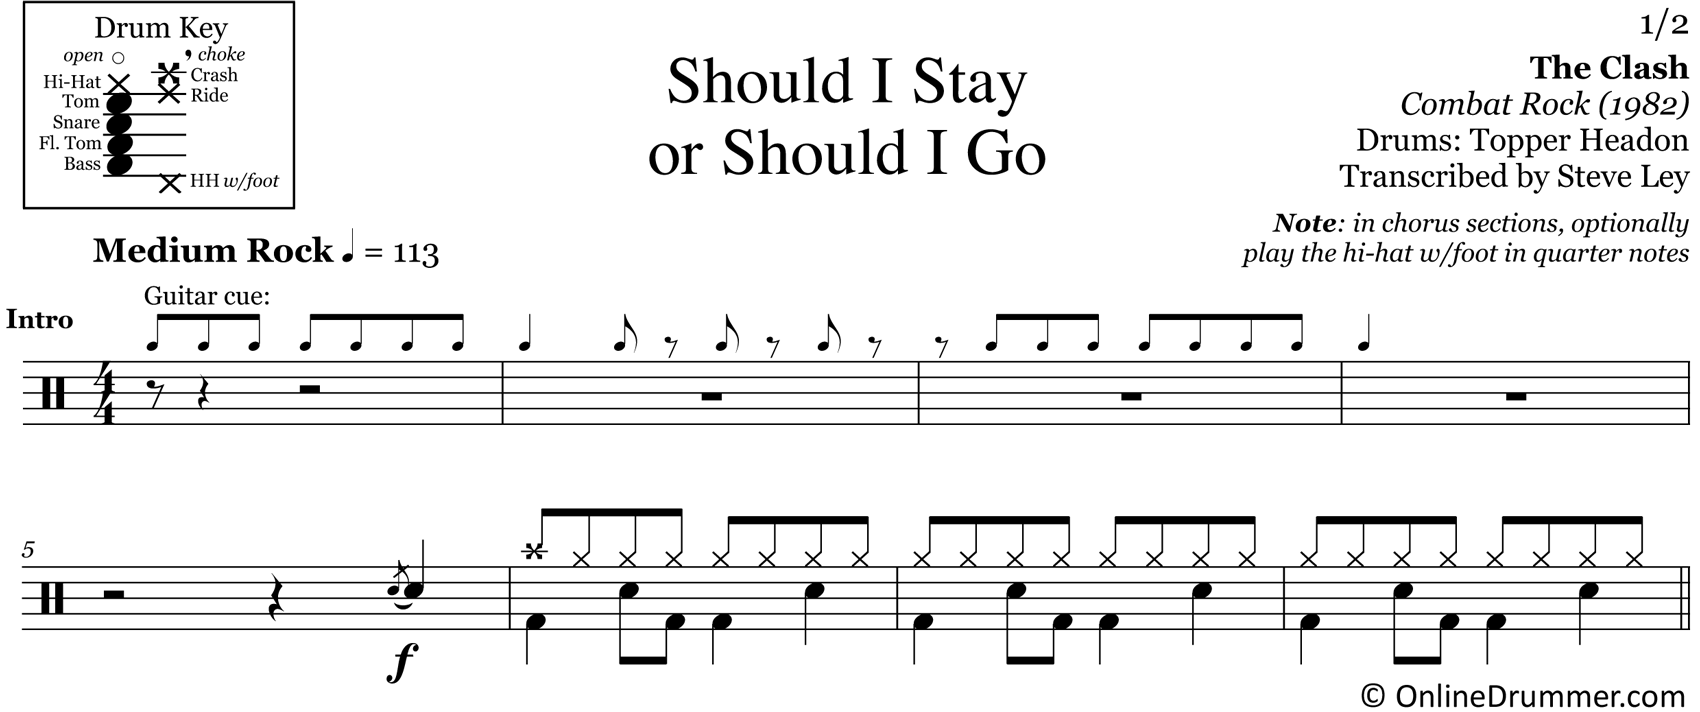 Should I Stay Or Should I Go - The Clash - Drum Sheet Music